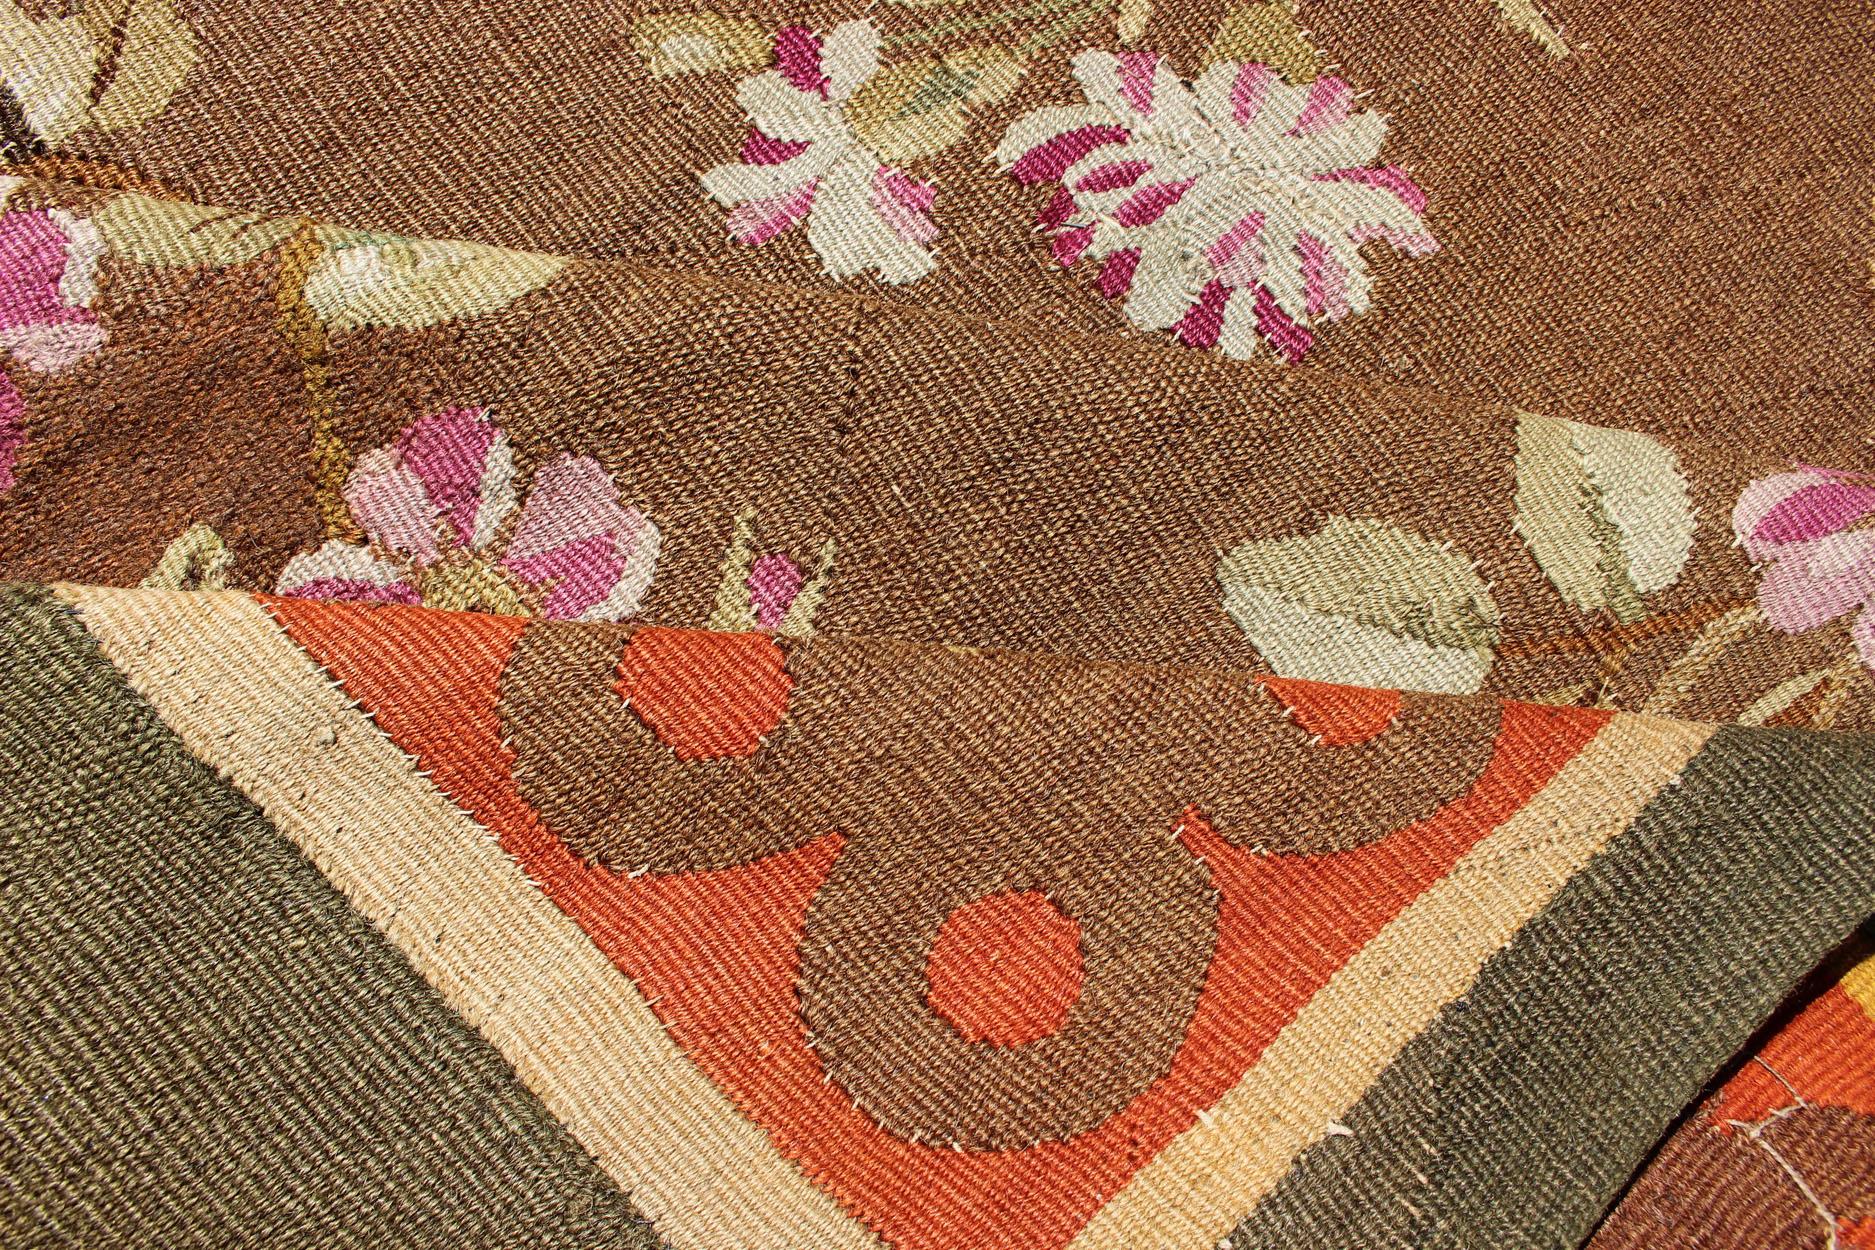 Late 19th Century Antique European French Aubusson Rug with Rosset and Floral Design in Brown